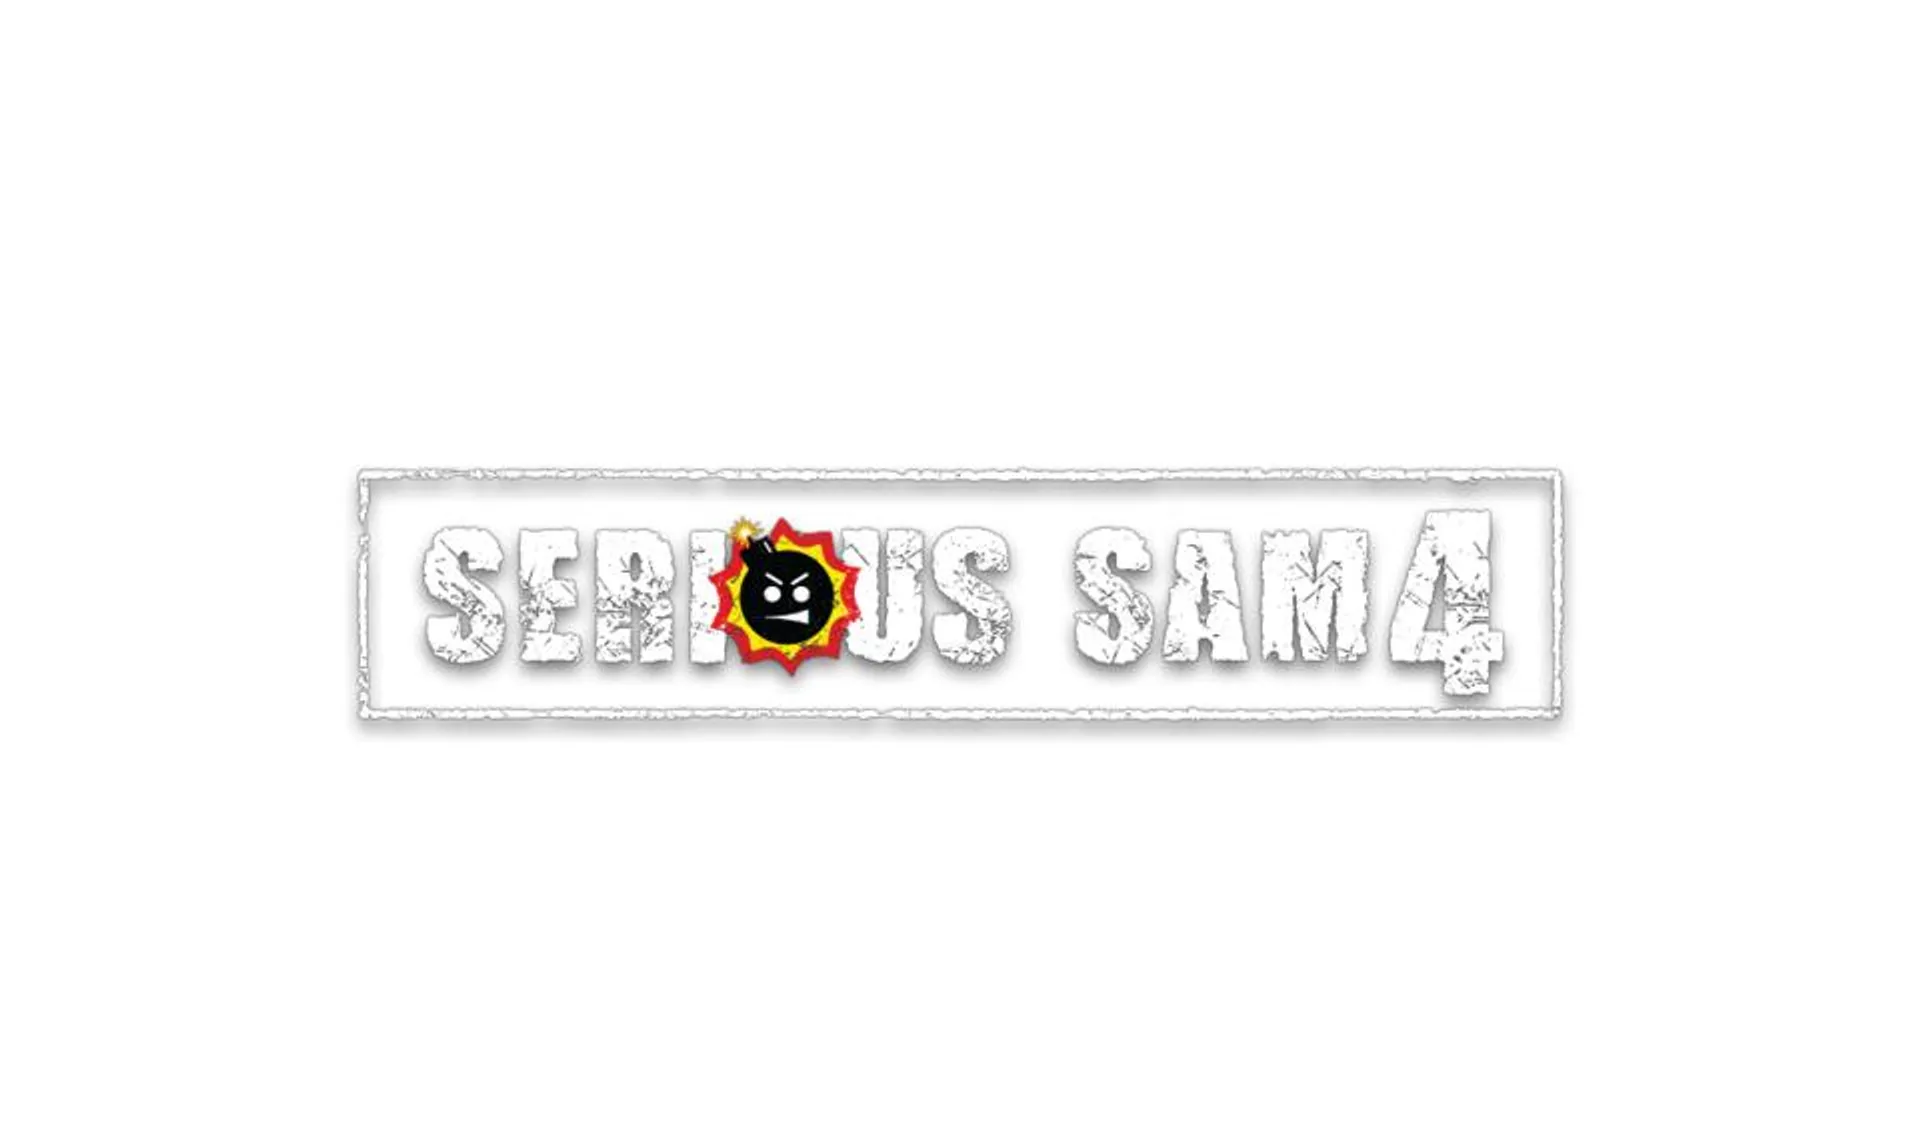 Serious Sam 4 Deluxe Edition